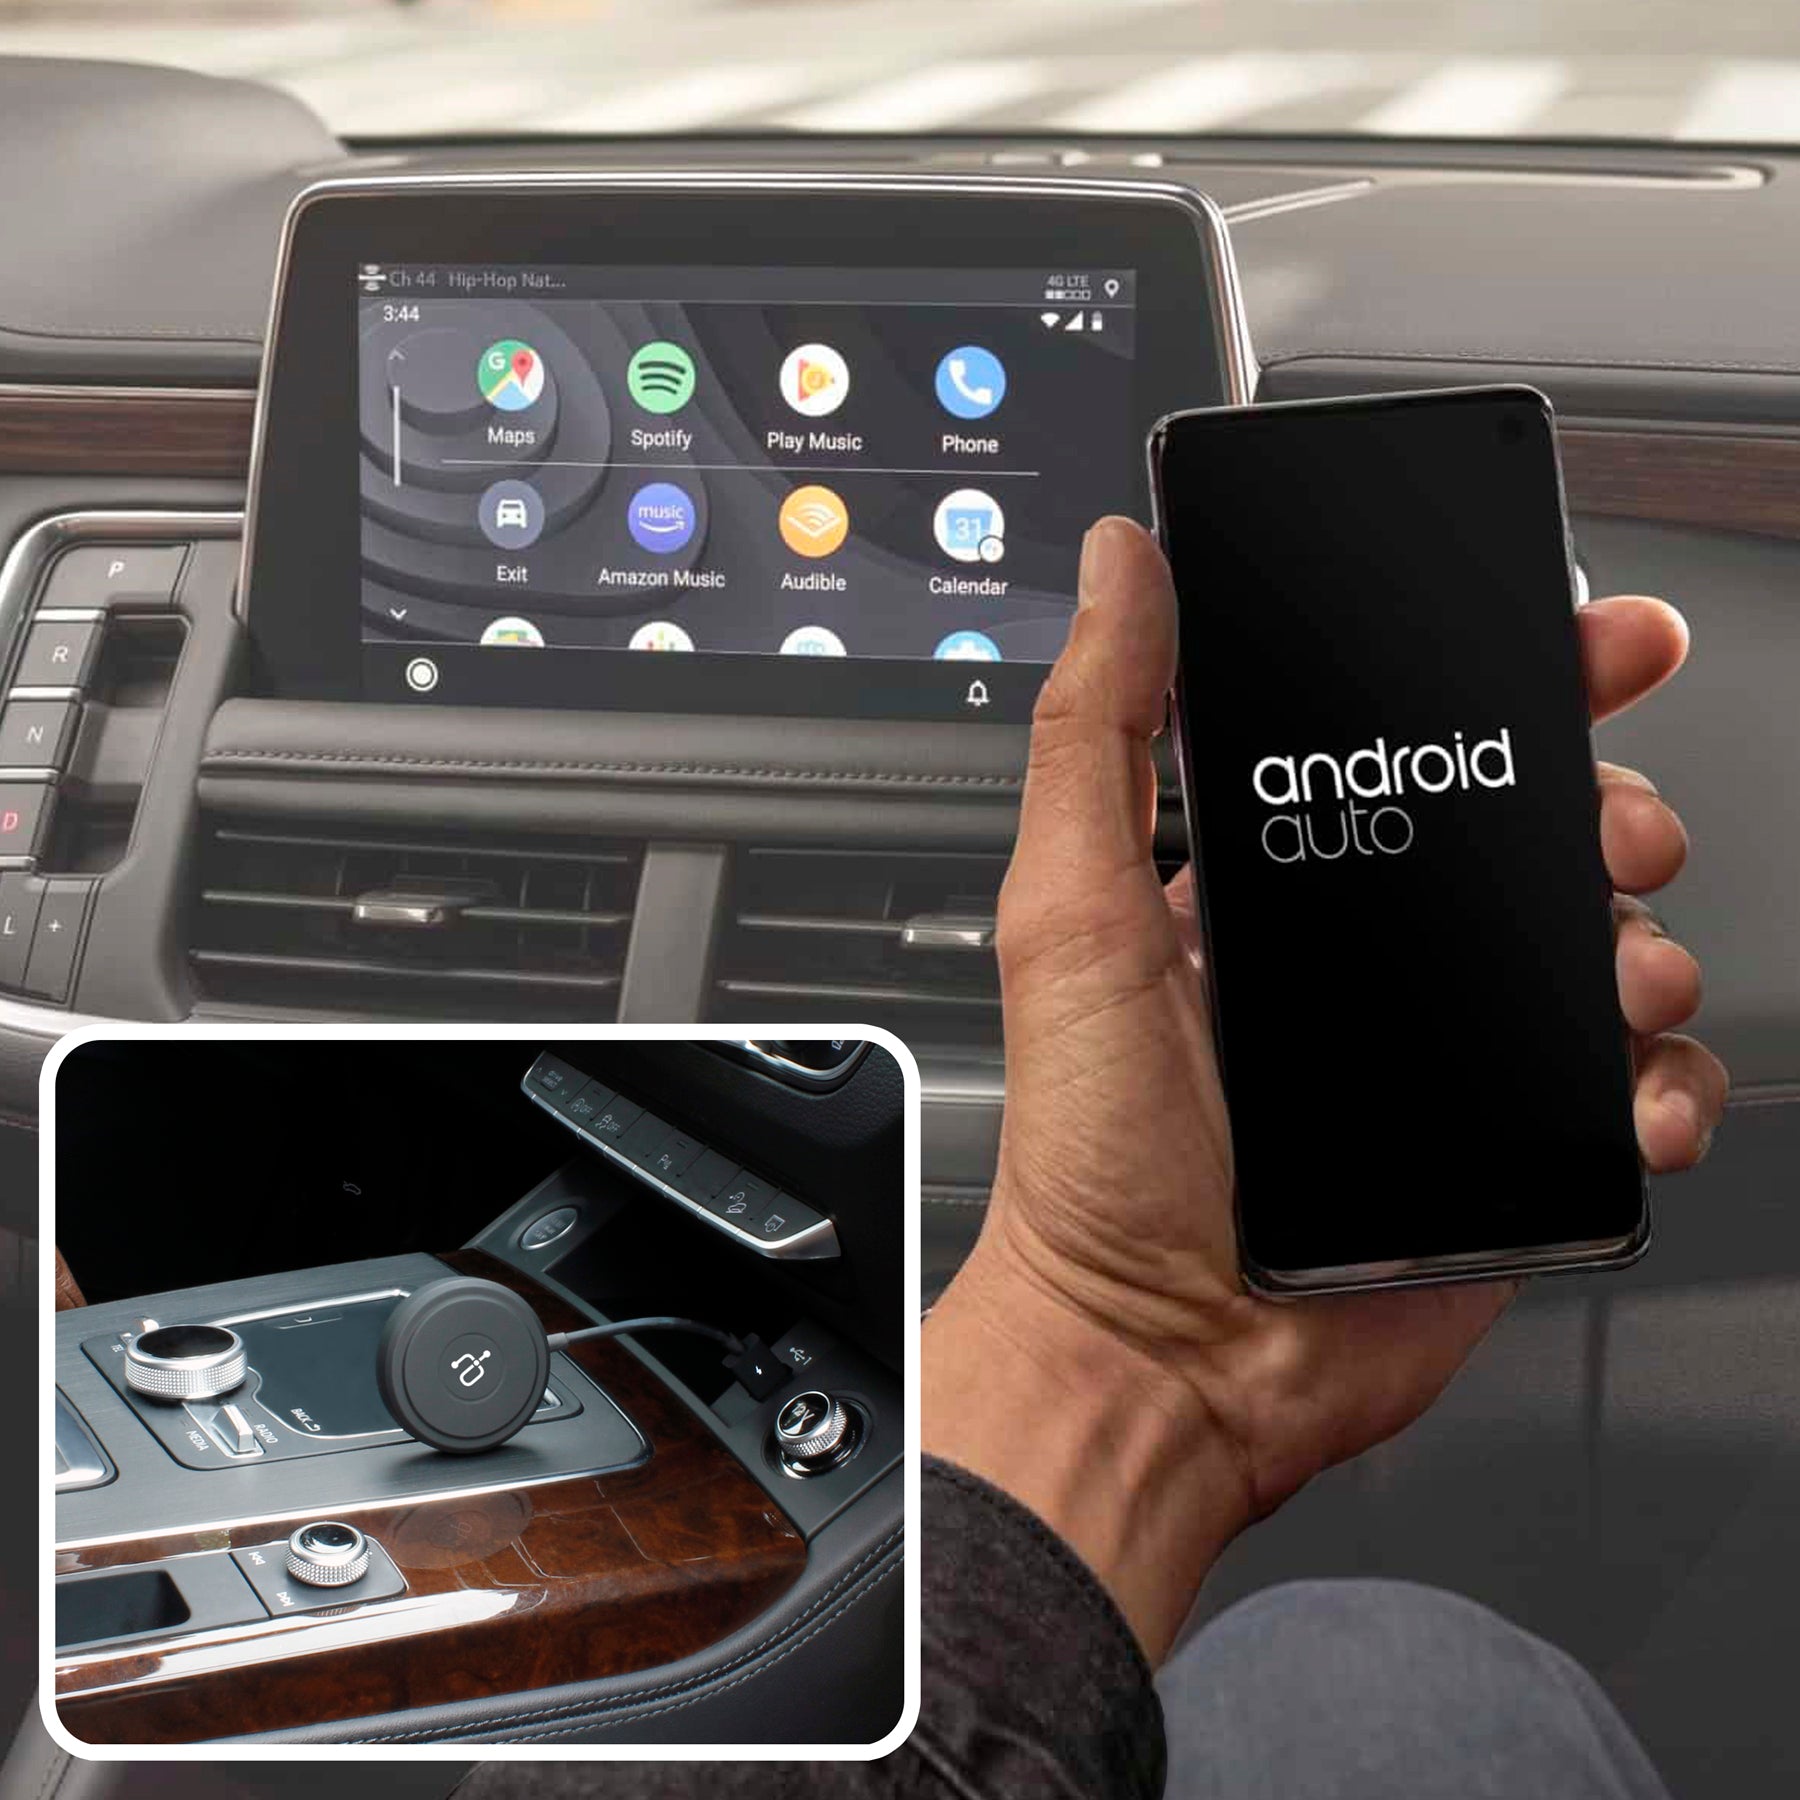 AAwireless Android Auto adapter for Android smartphone use